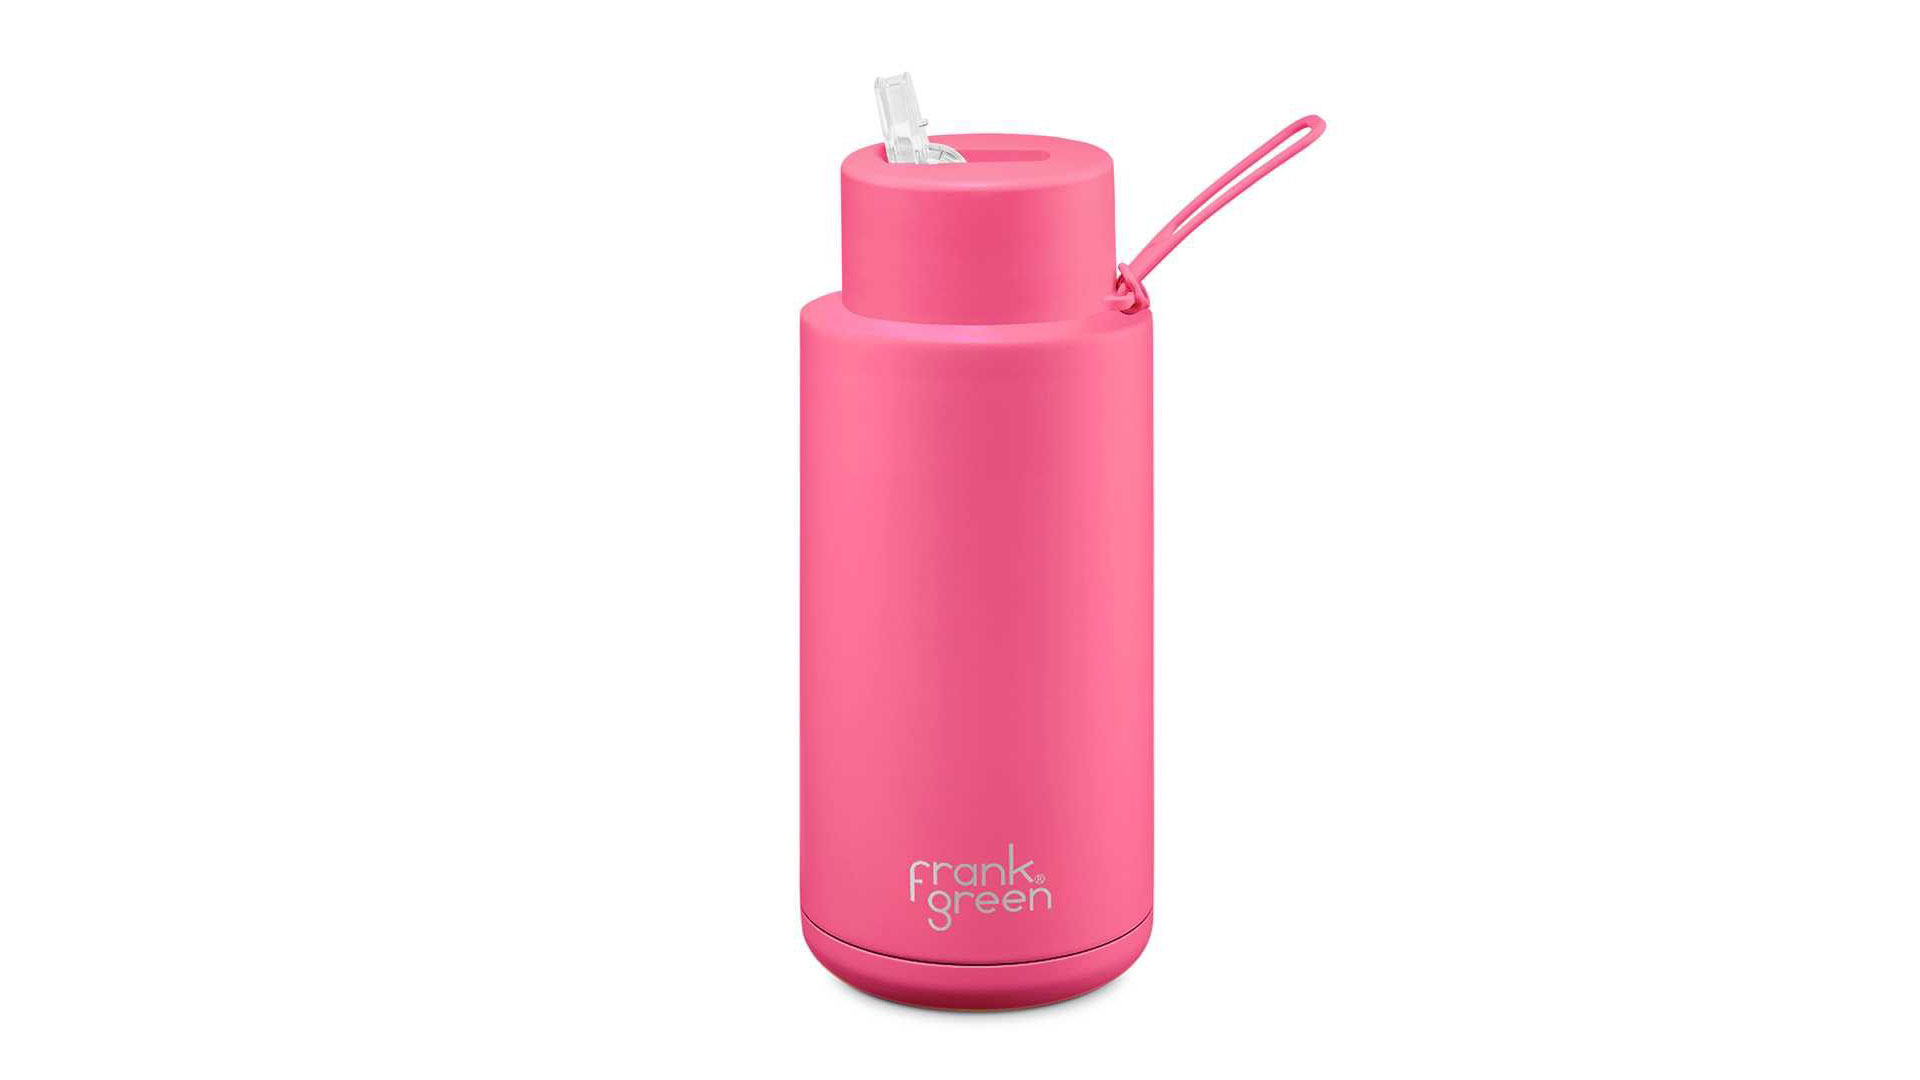 A pink Frank Green water bottle on a white background.